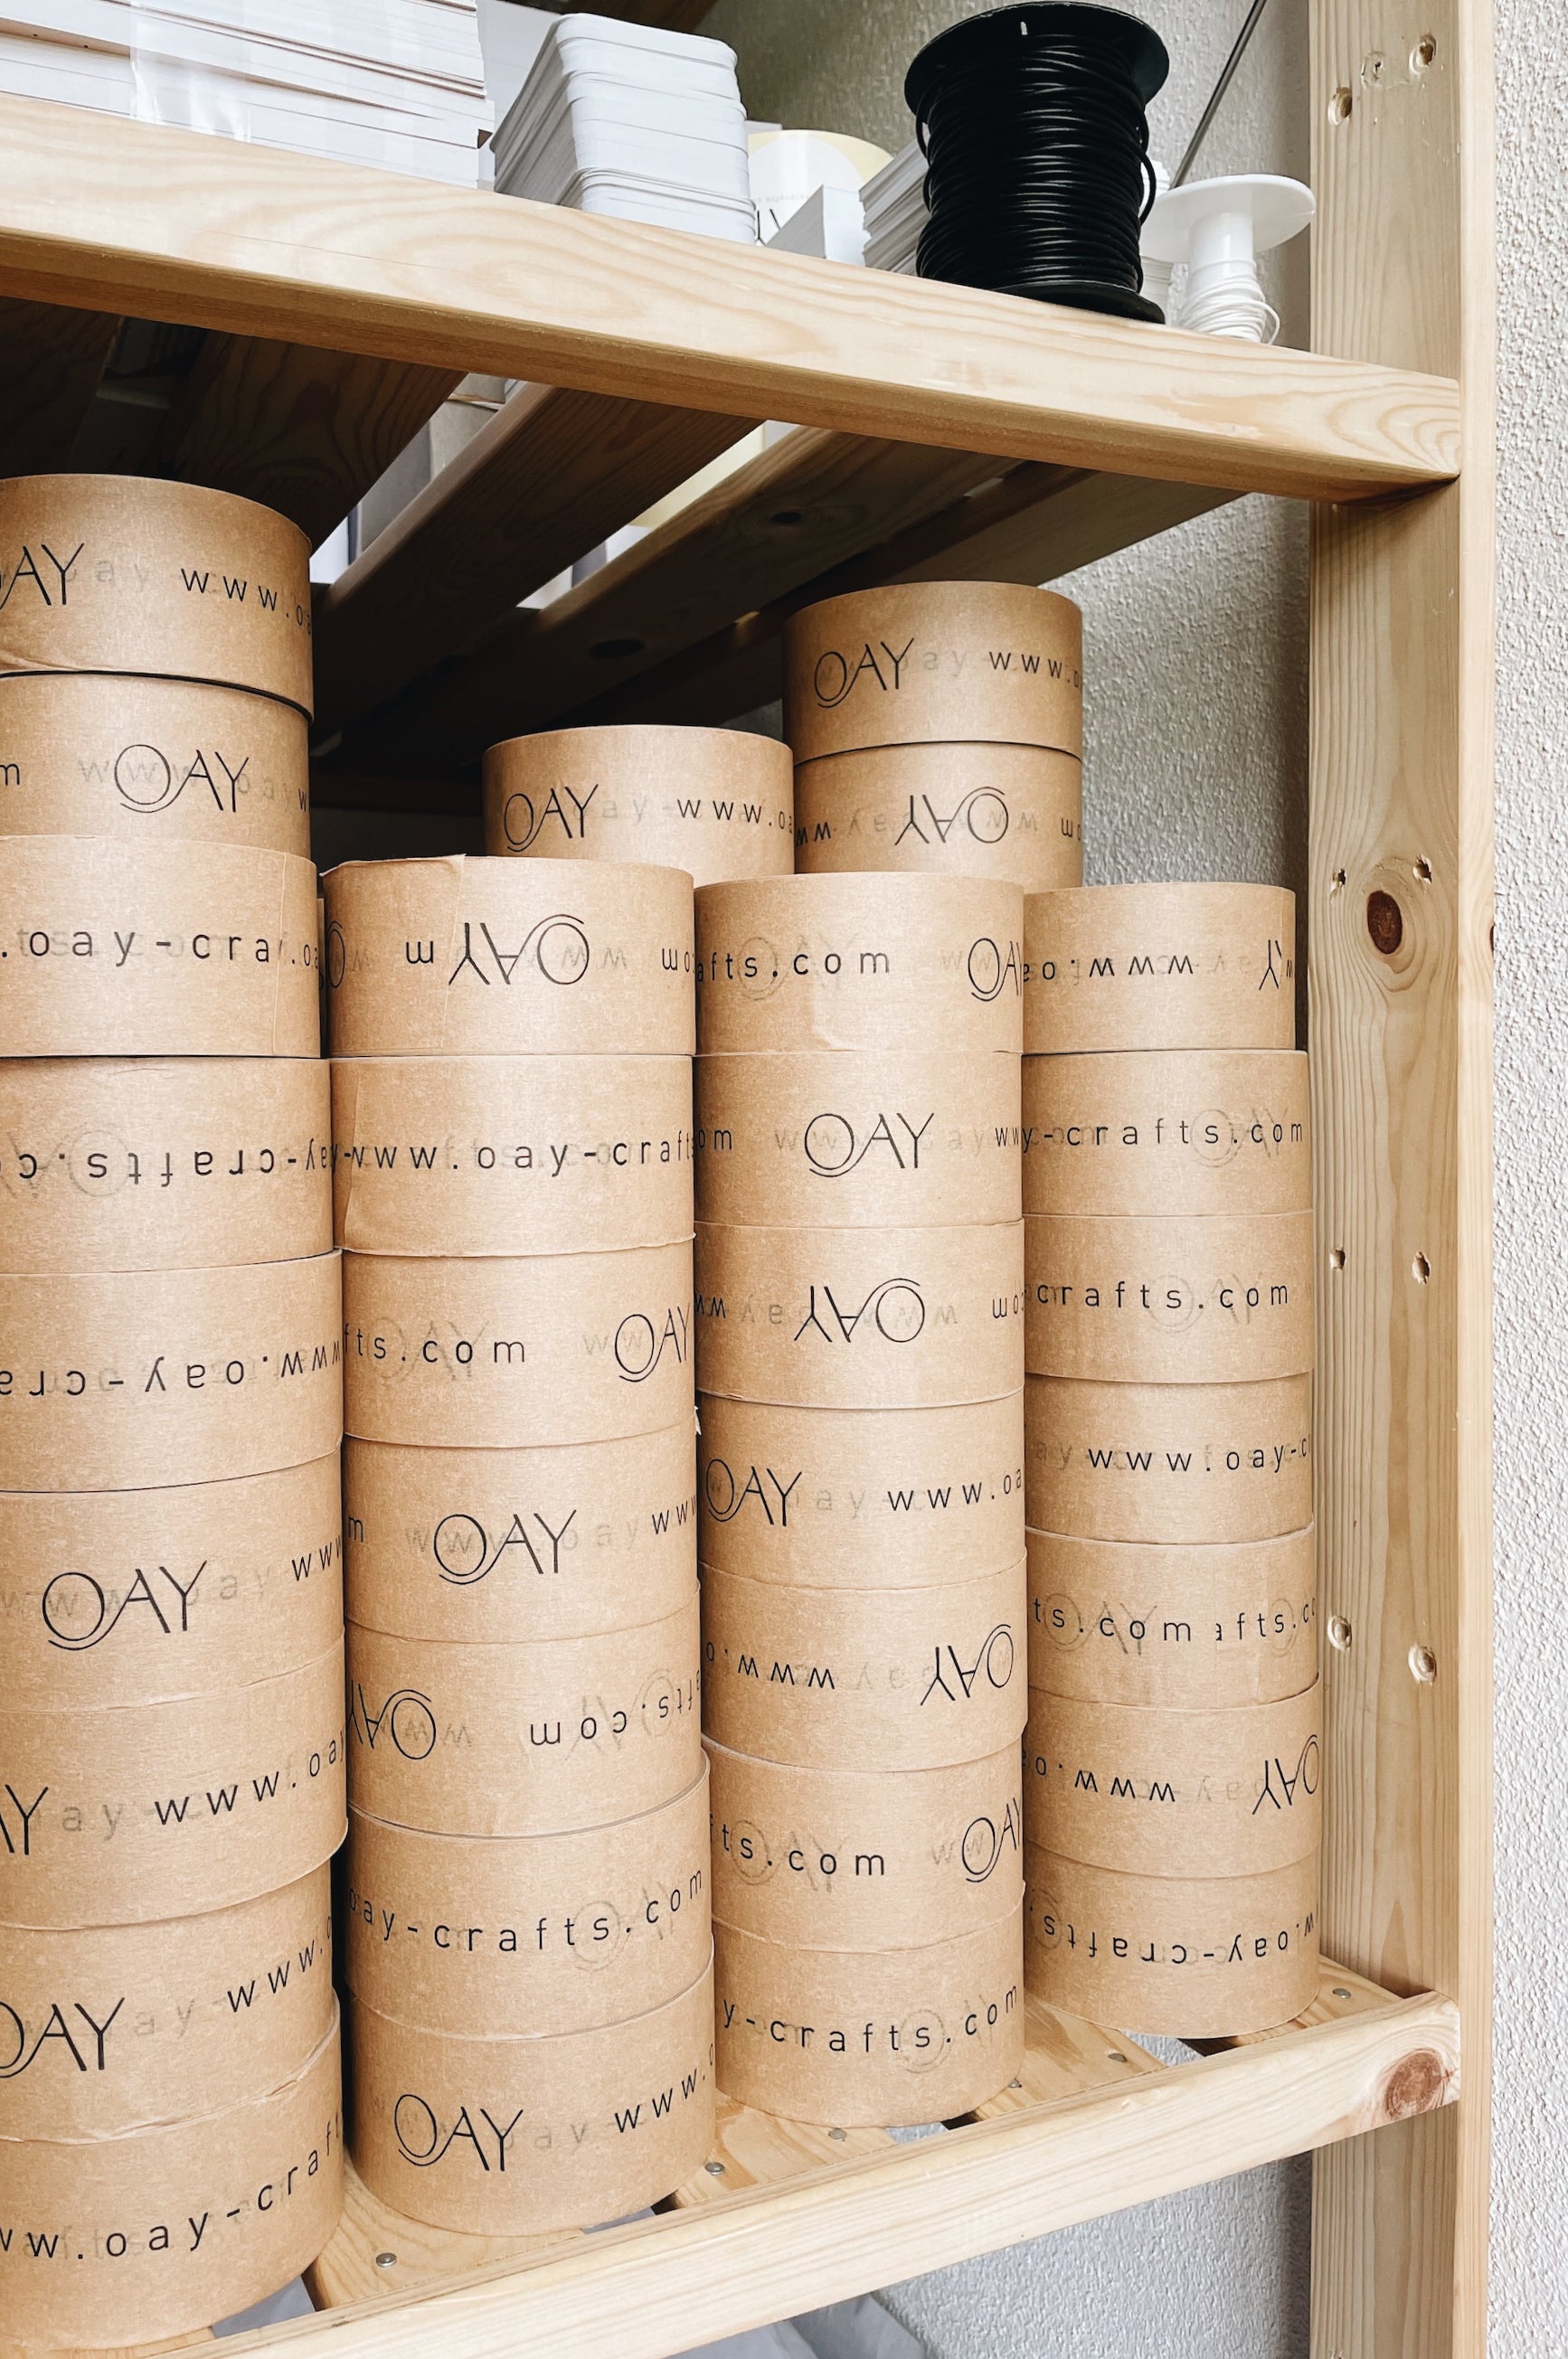 Adhesive paper rolls for our packages - OAY